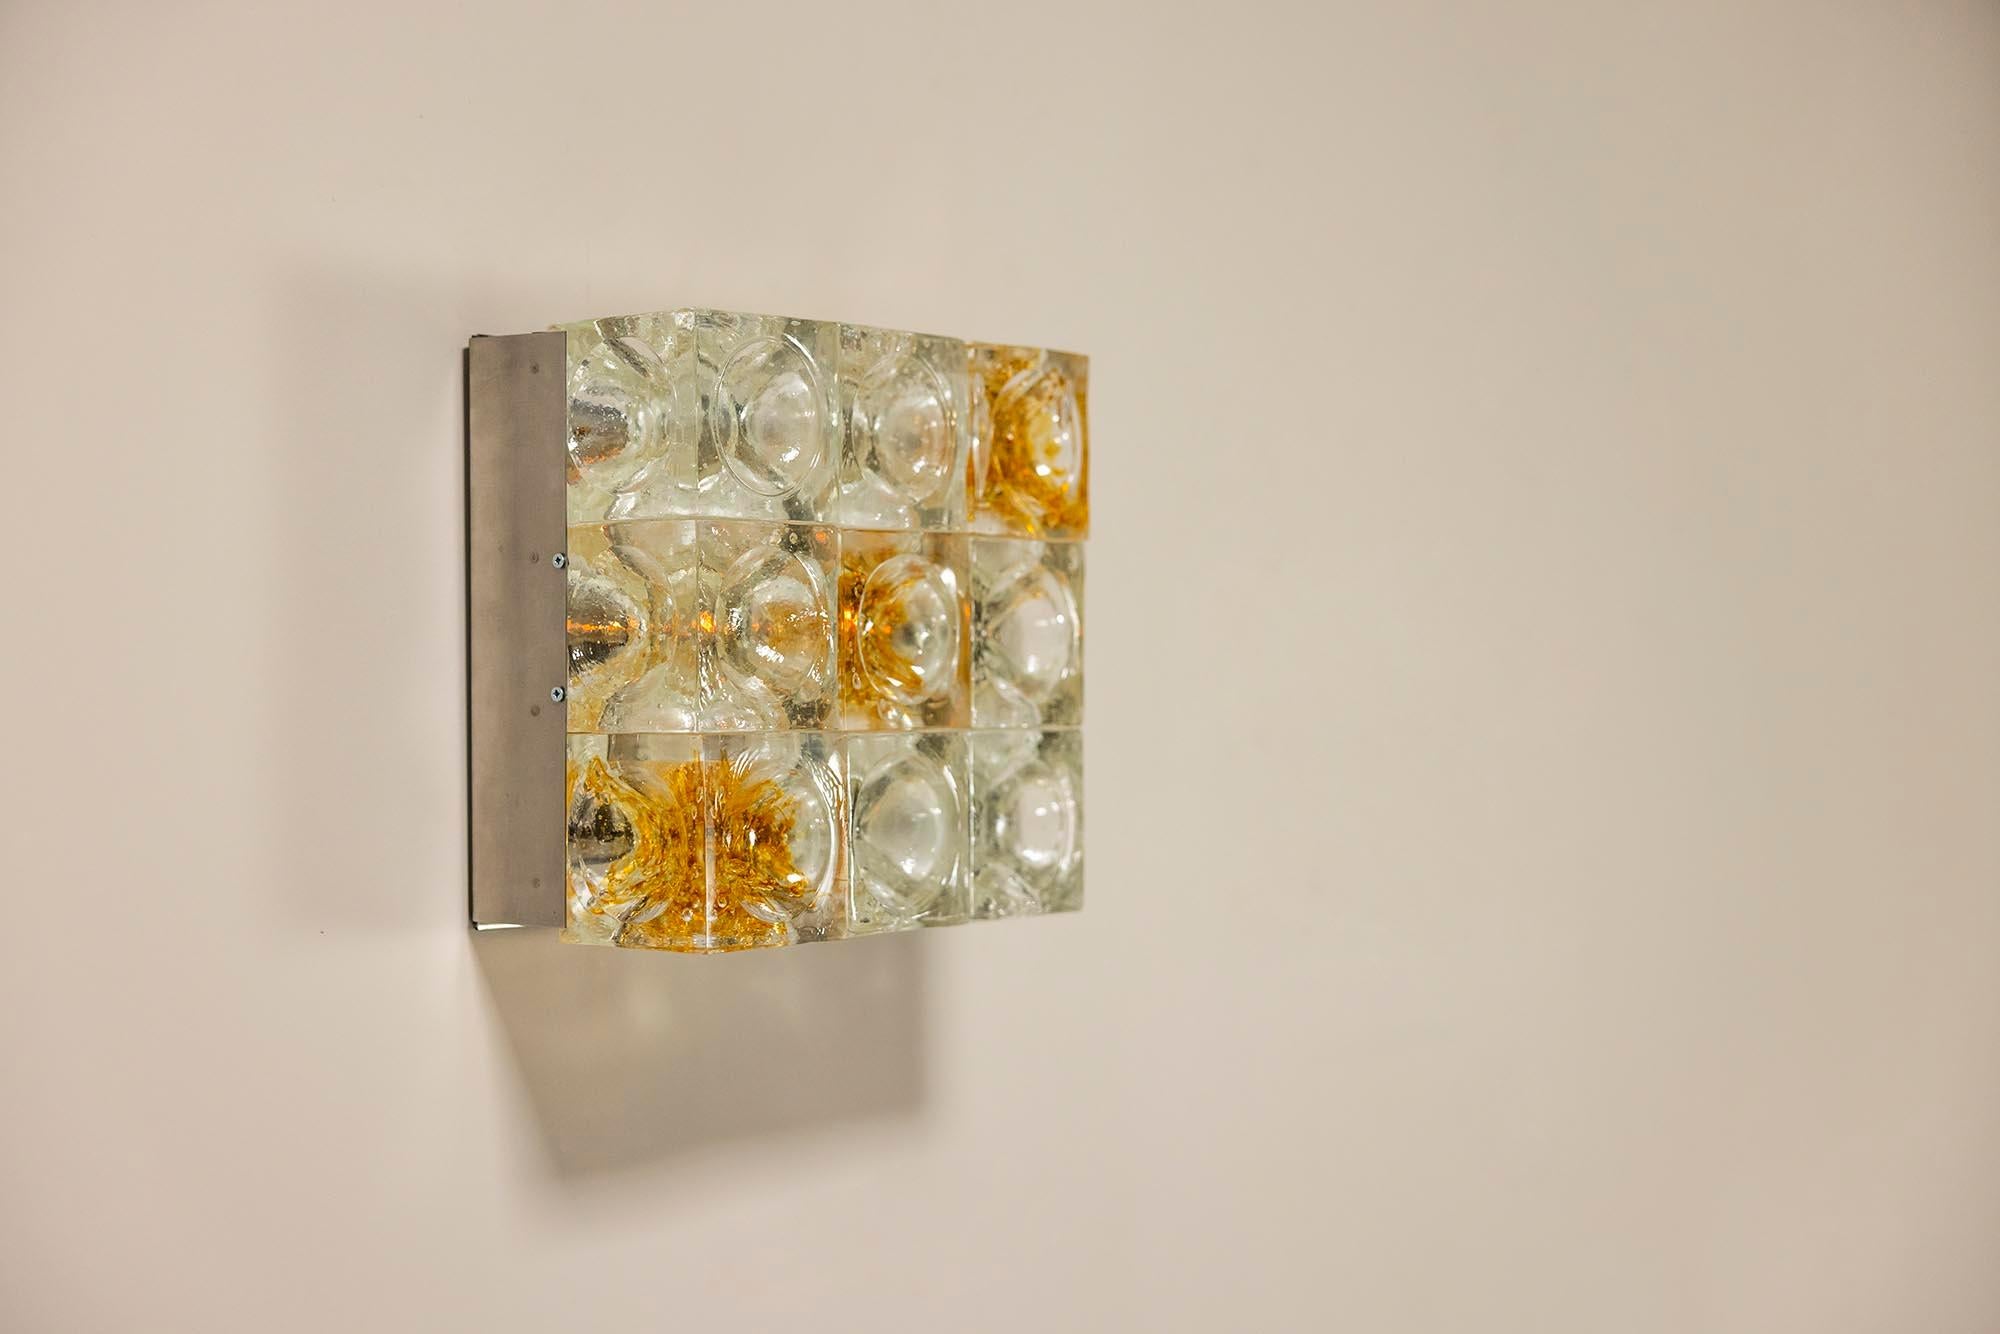 Albano Poli is a glass artist from Verona who specializes mainly in stained glass techniques. In 1953 he opened a small studio and in the early 1970s he started the PoliArte label, which was entirely focused on making lamps.

Design
This wall sconce